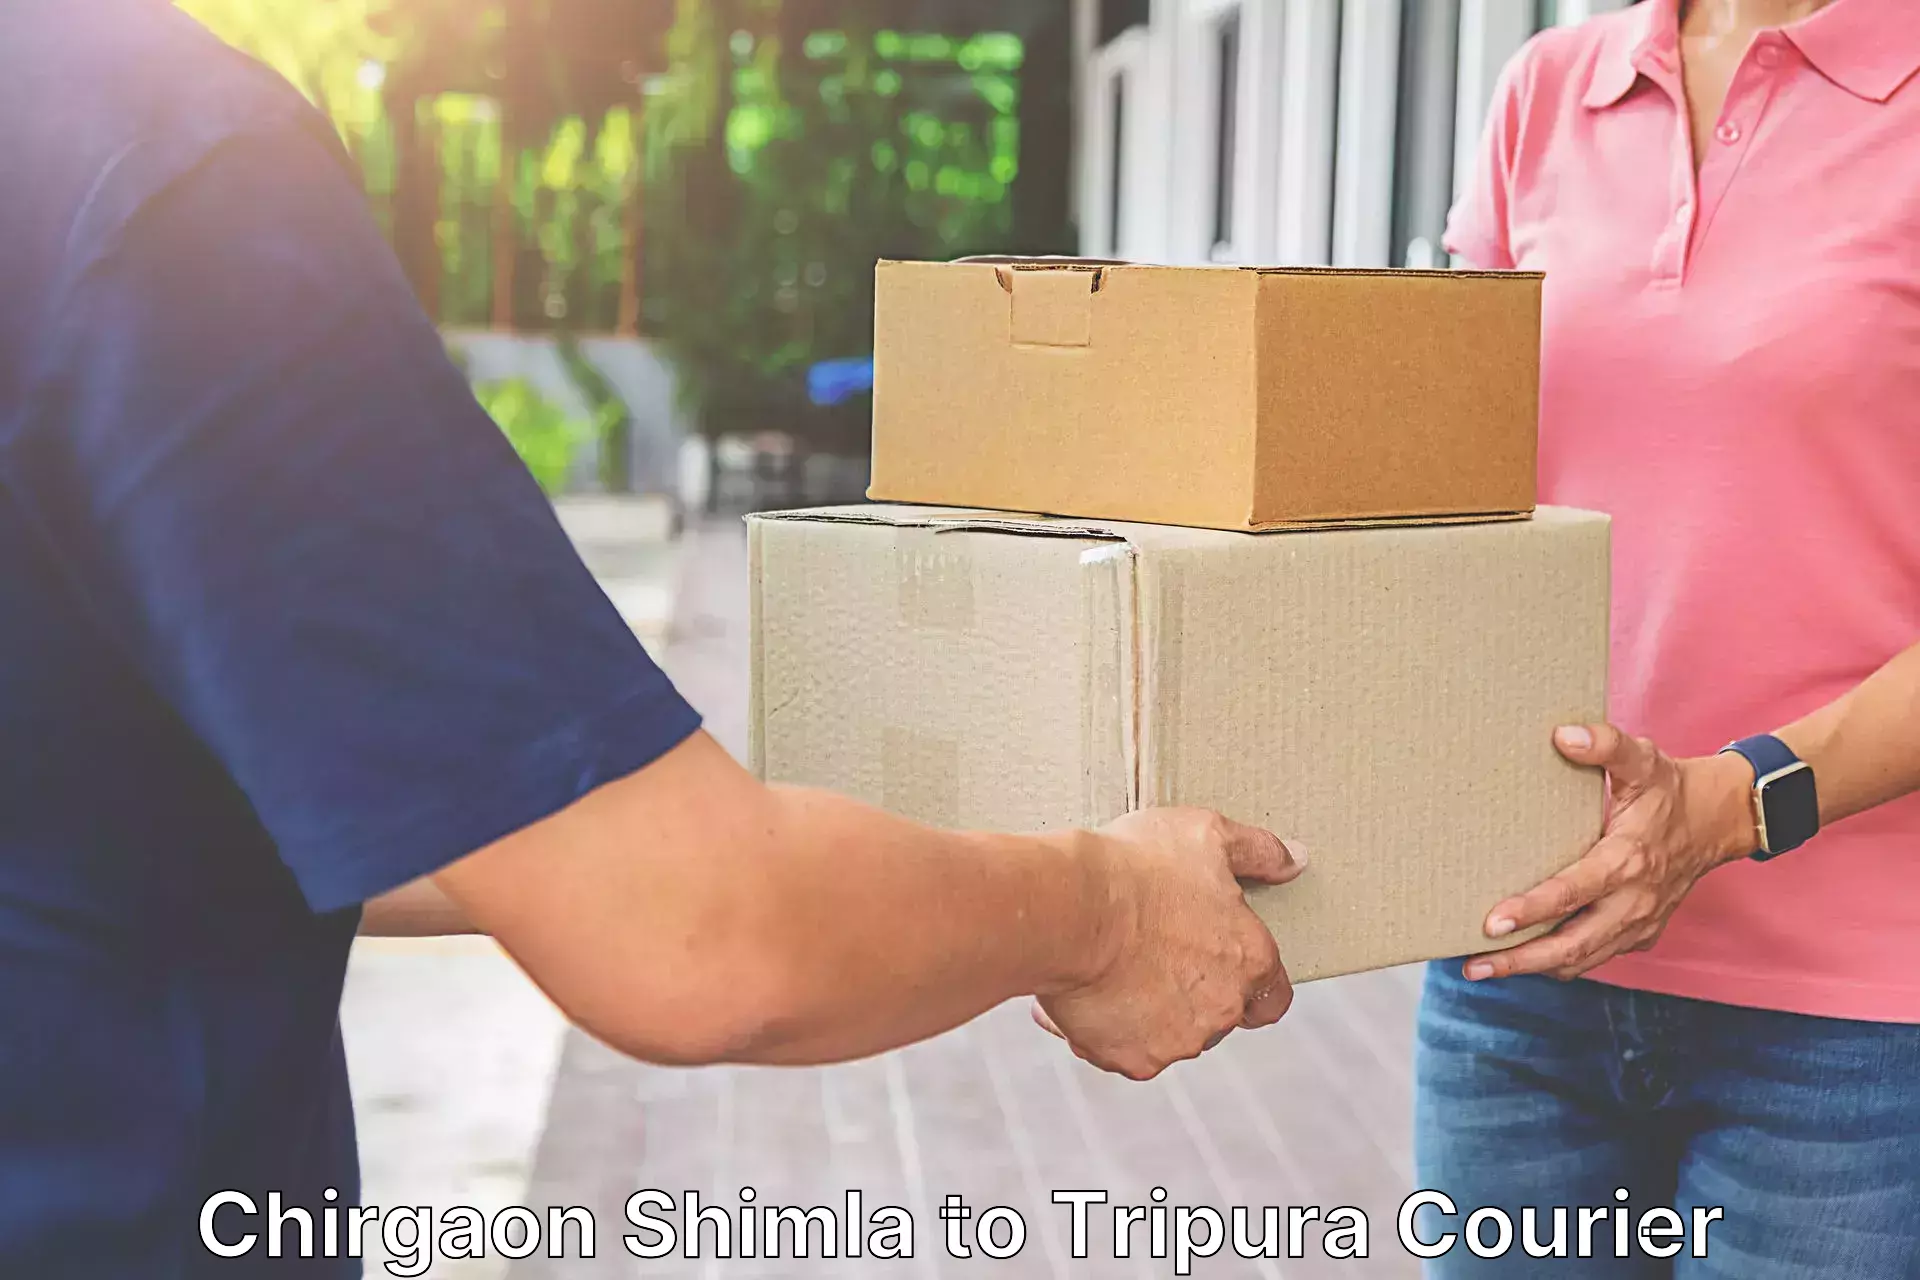 Residential courier service Chirgaon Shimla to Tripura